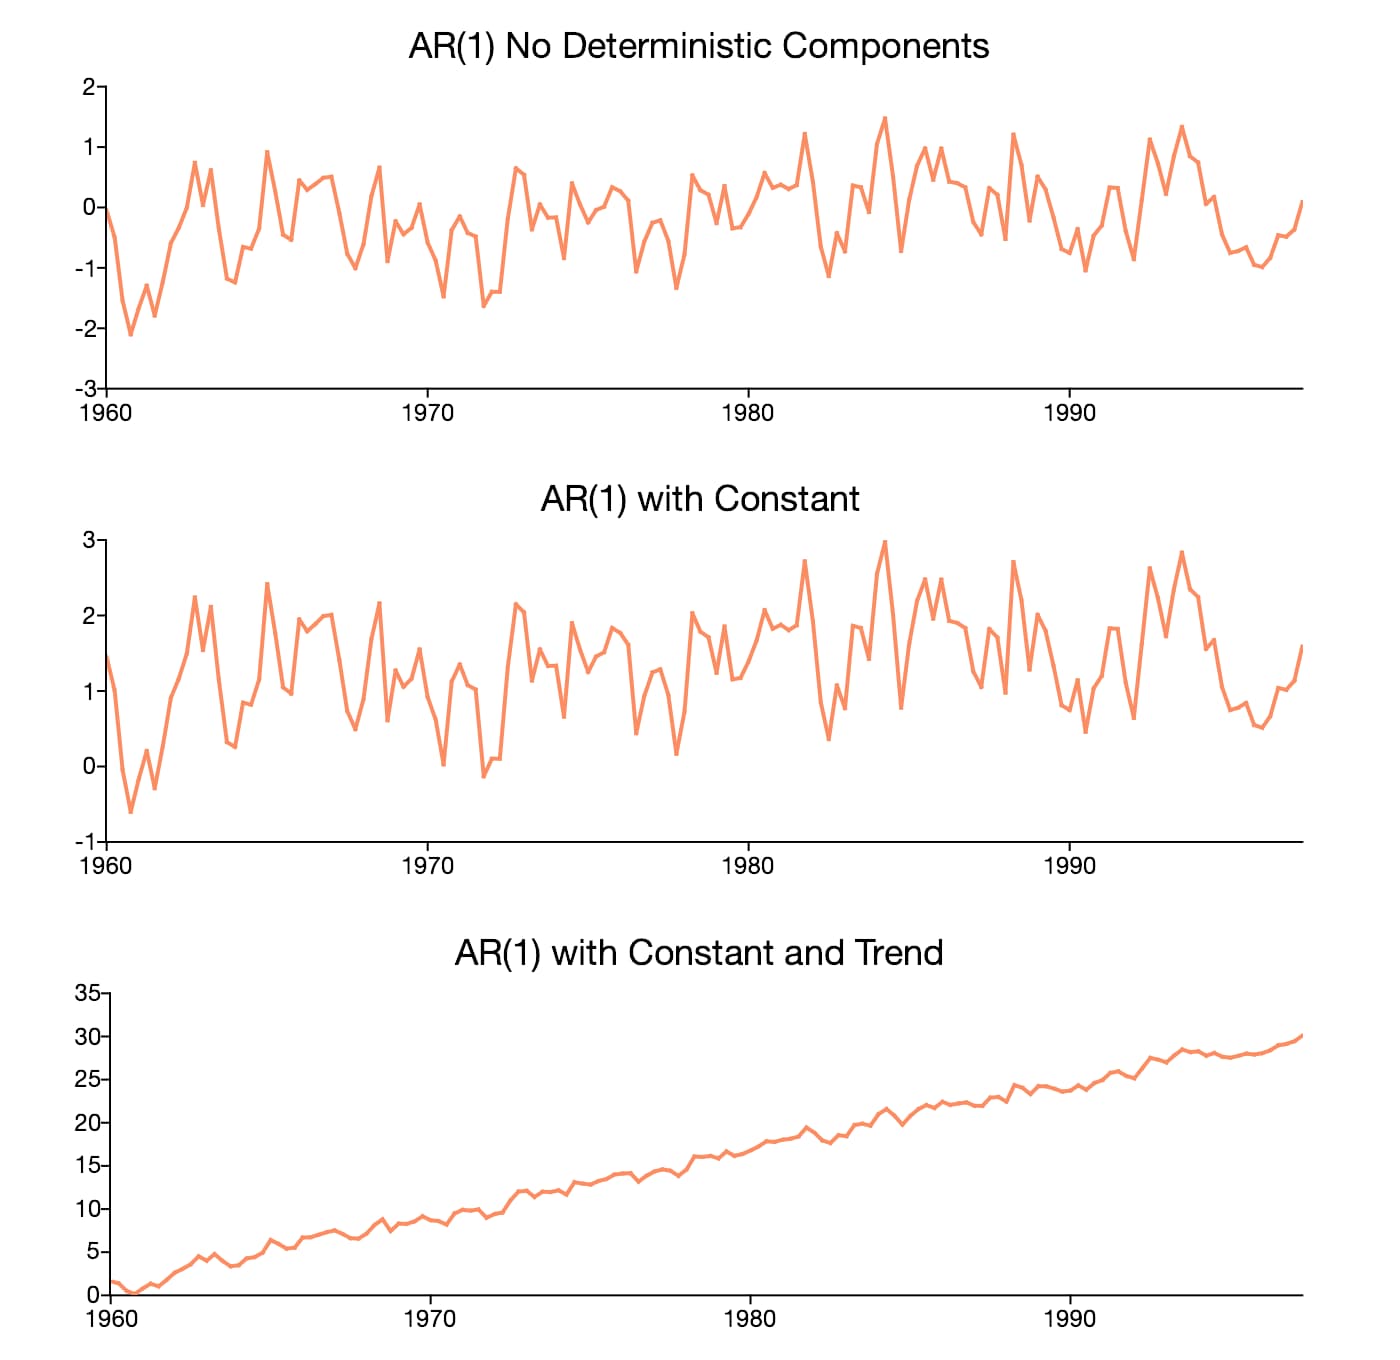 Graph of AR(1) time series with a constant, one with a constant and trend and one without any deterministic components.